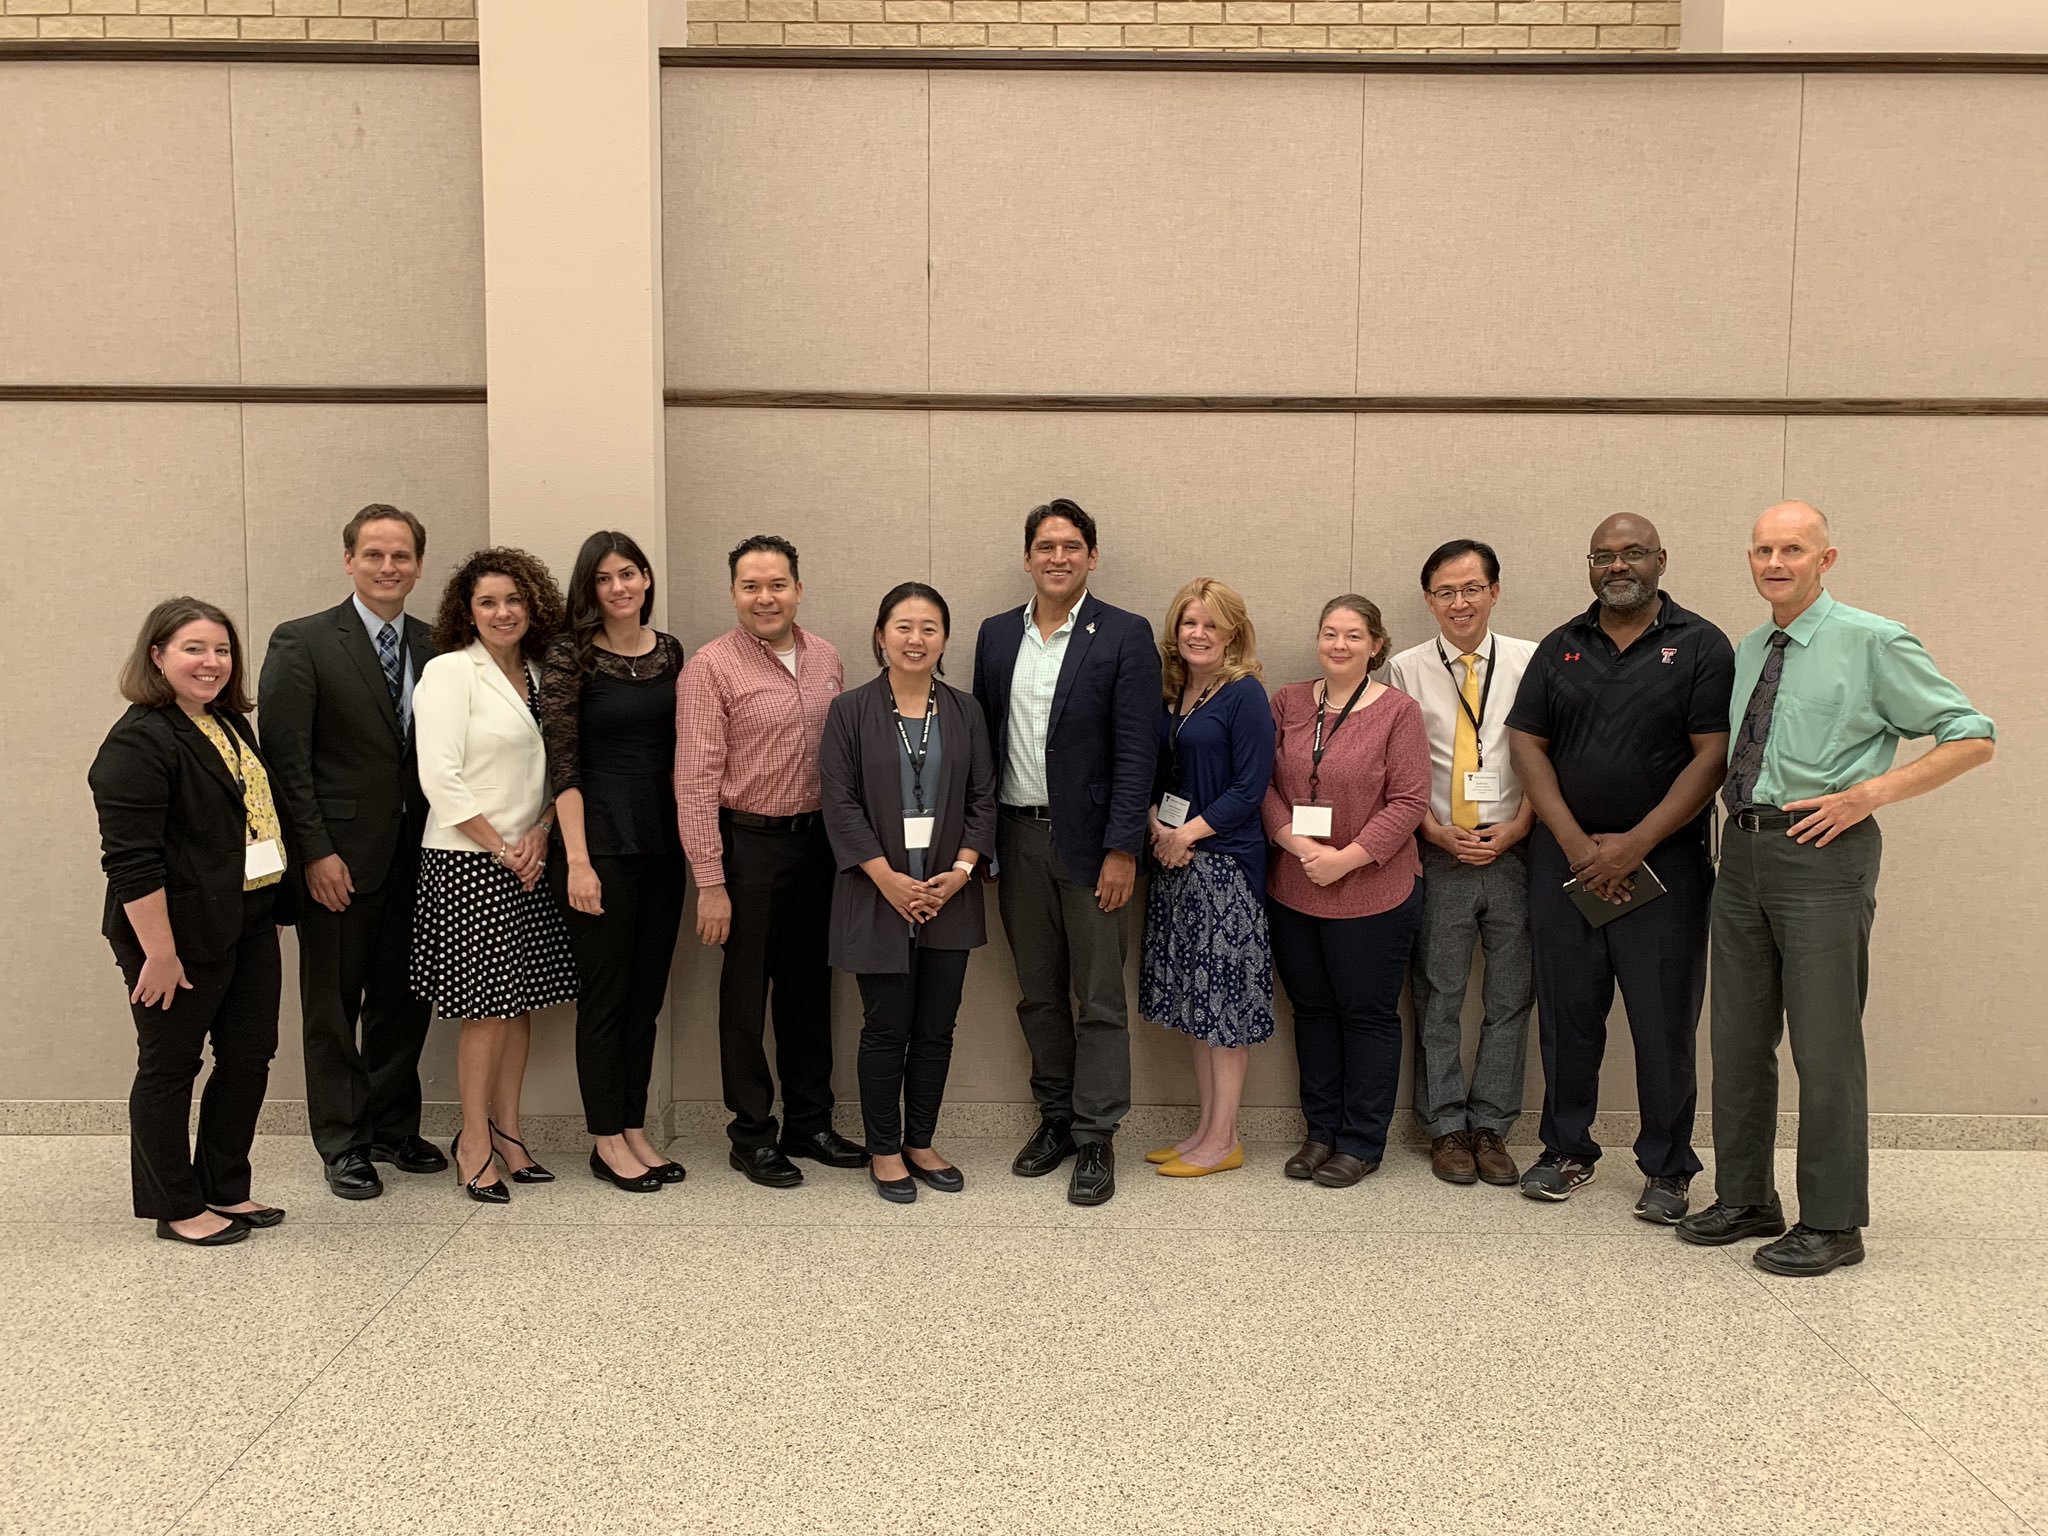 New faculty members pose with the dean and department chairs